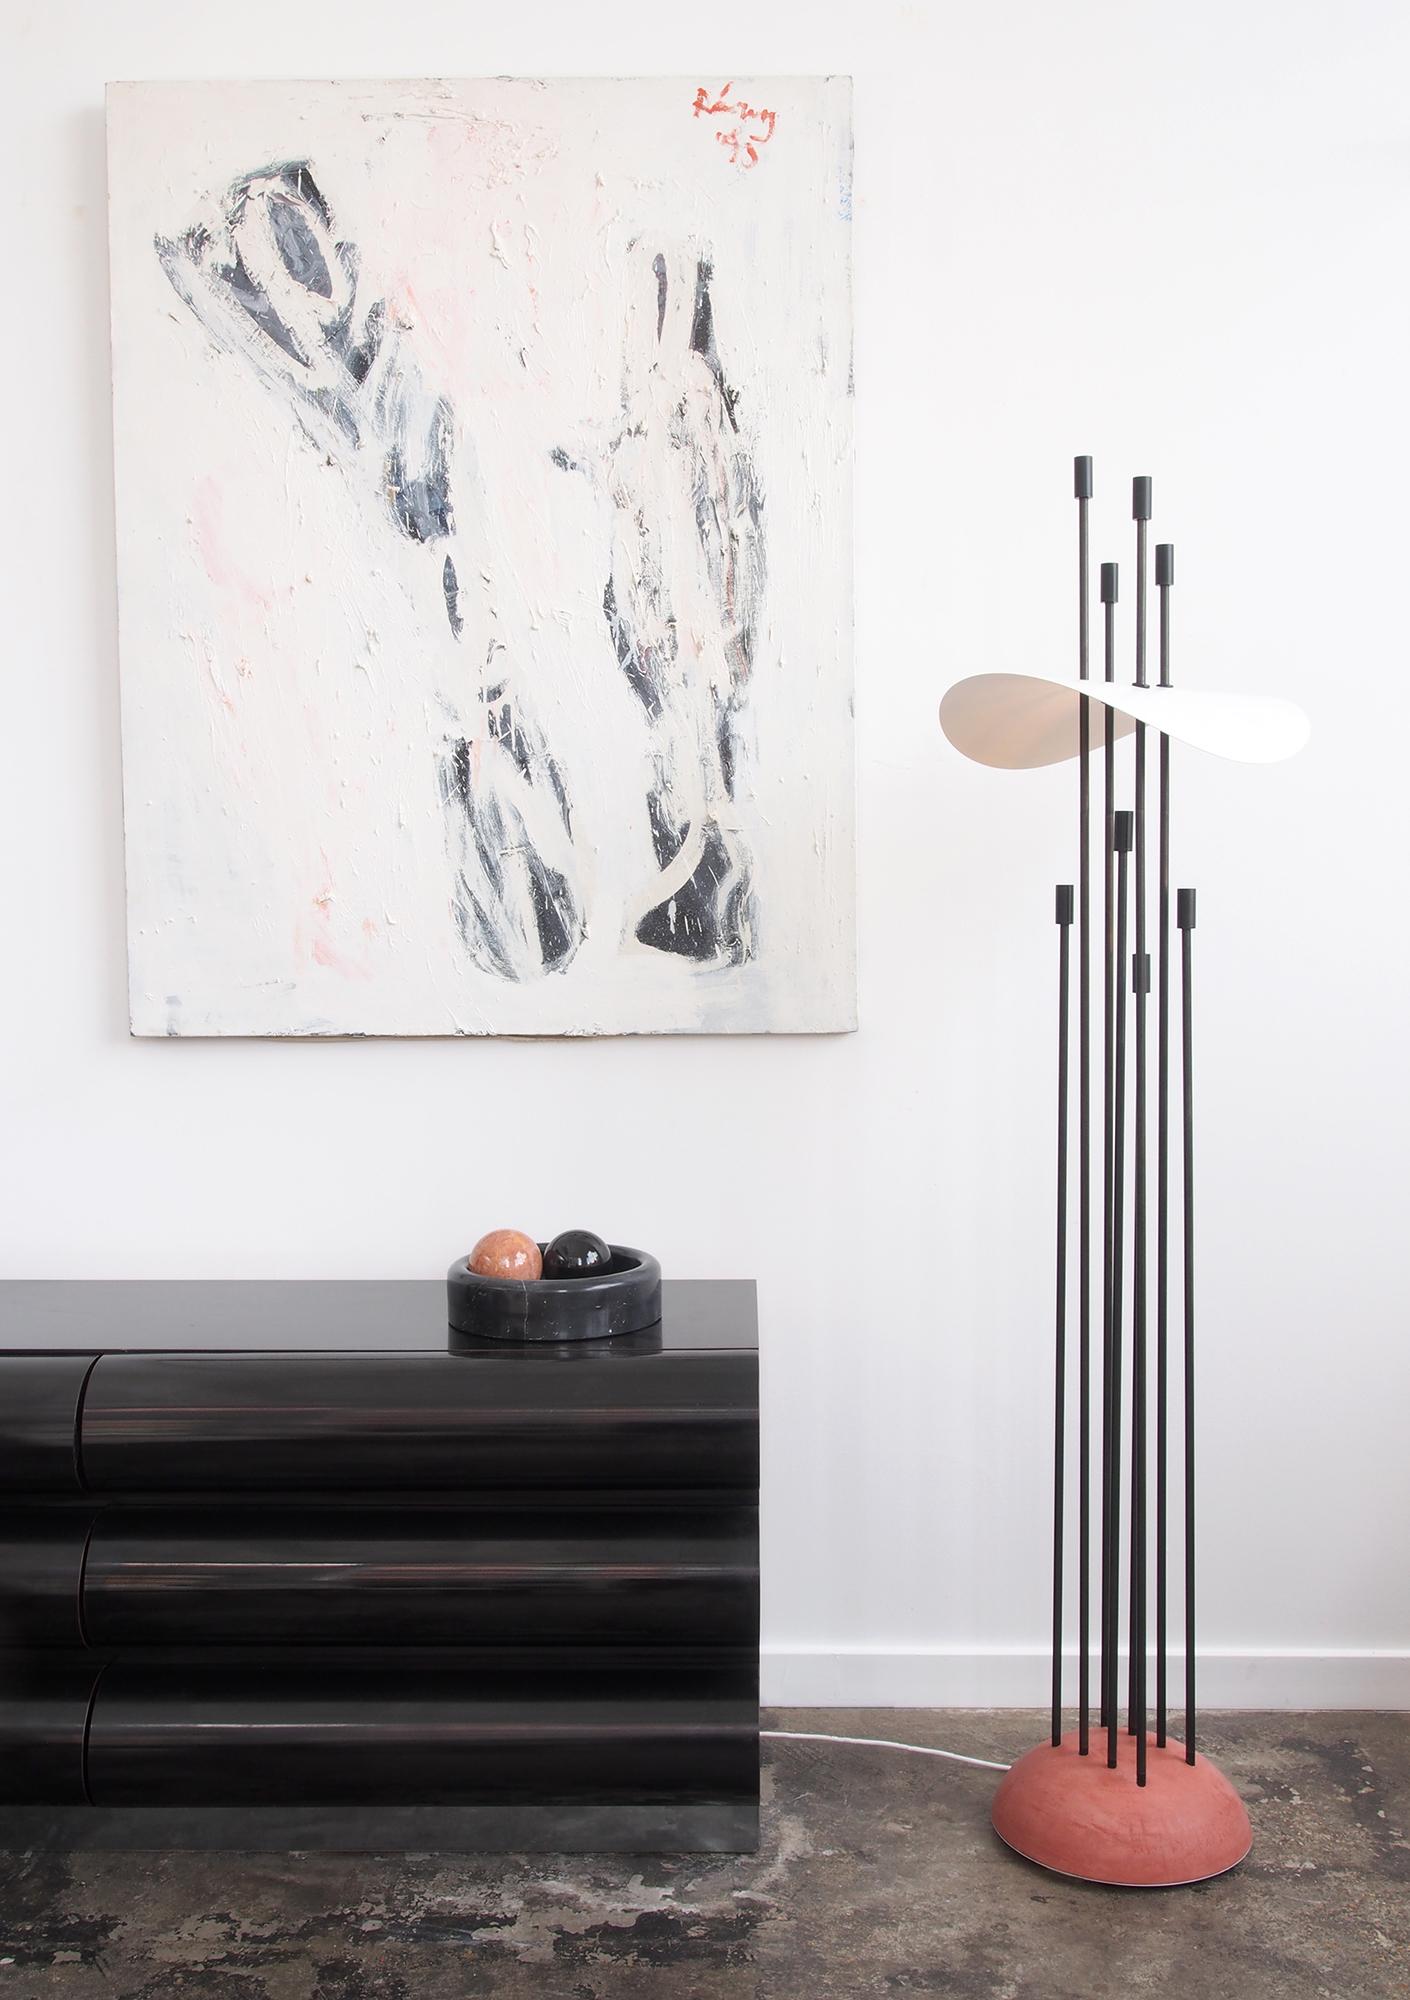 Ida Floor Lamp’s vertical rods act as both light source and support for its curved white reflector. Four shorter rods direct light downward via the reflector, while four taller ones create an ambient glow on the ceiling and surrounding space.

UL